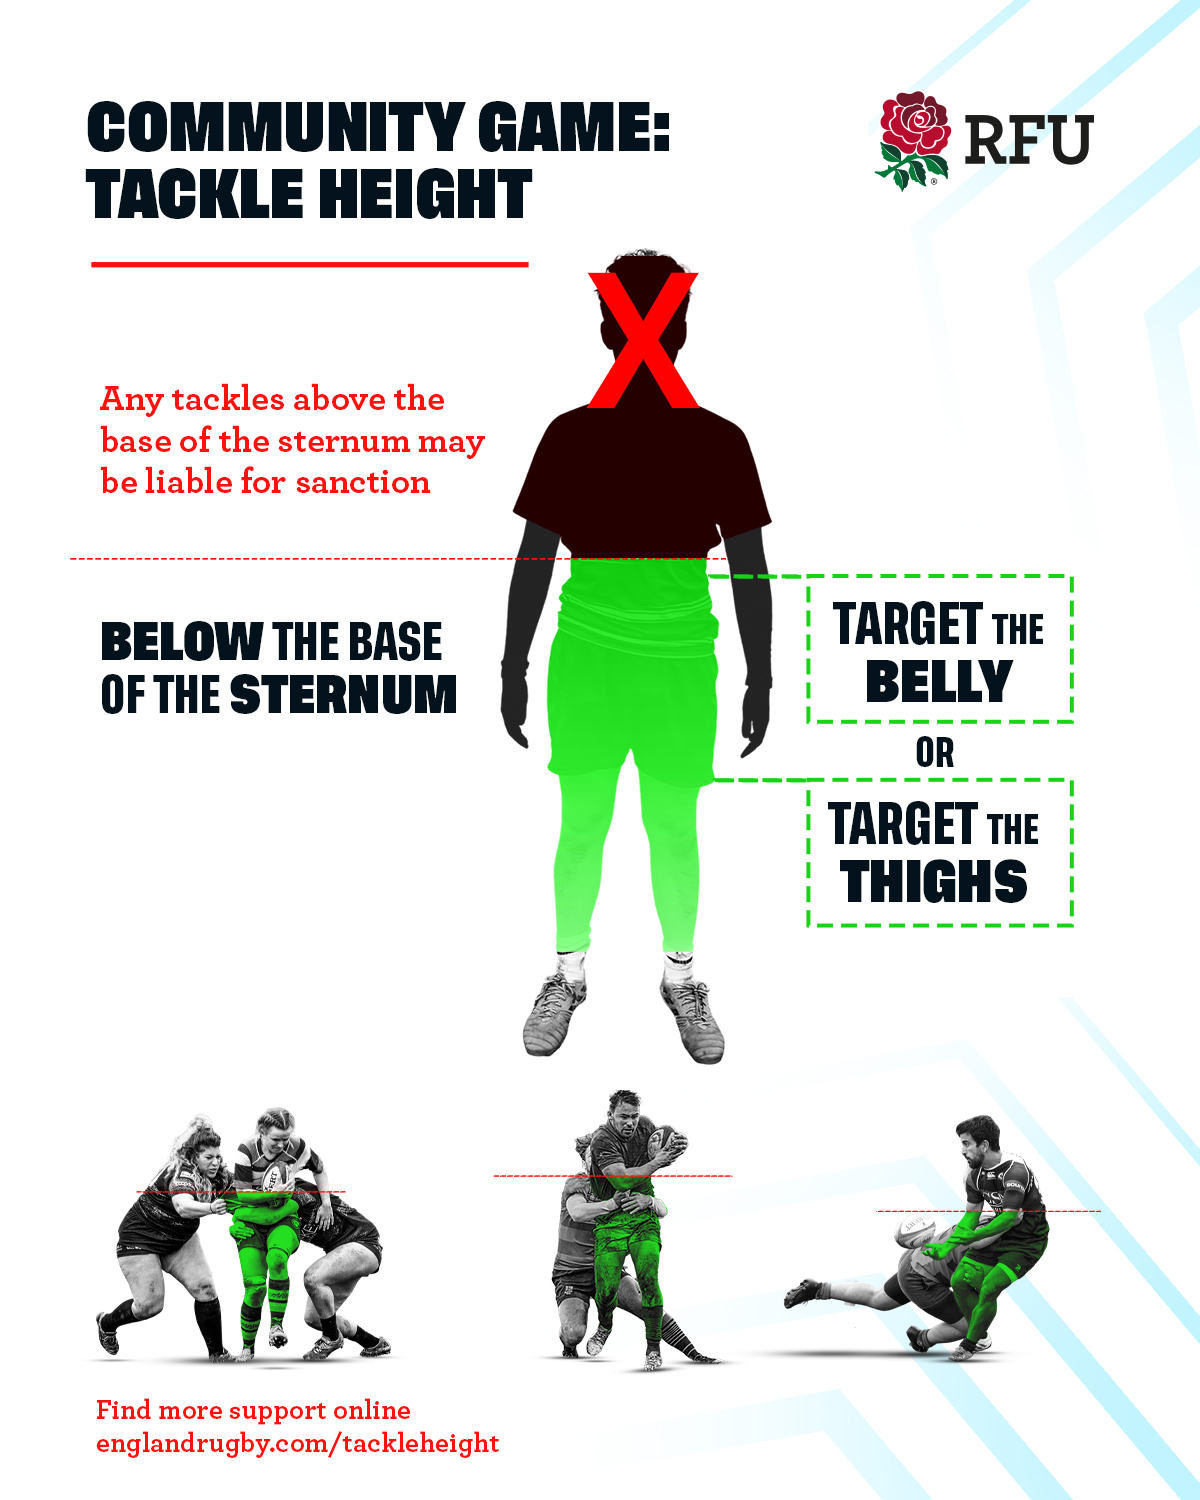 Tackle height